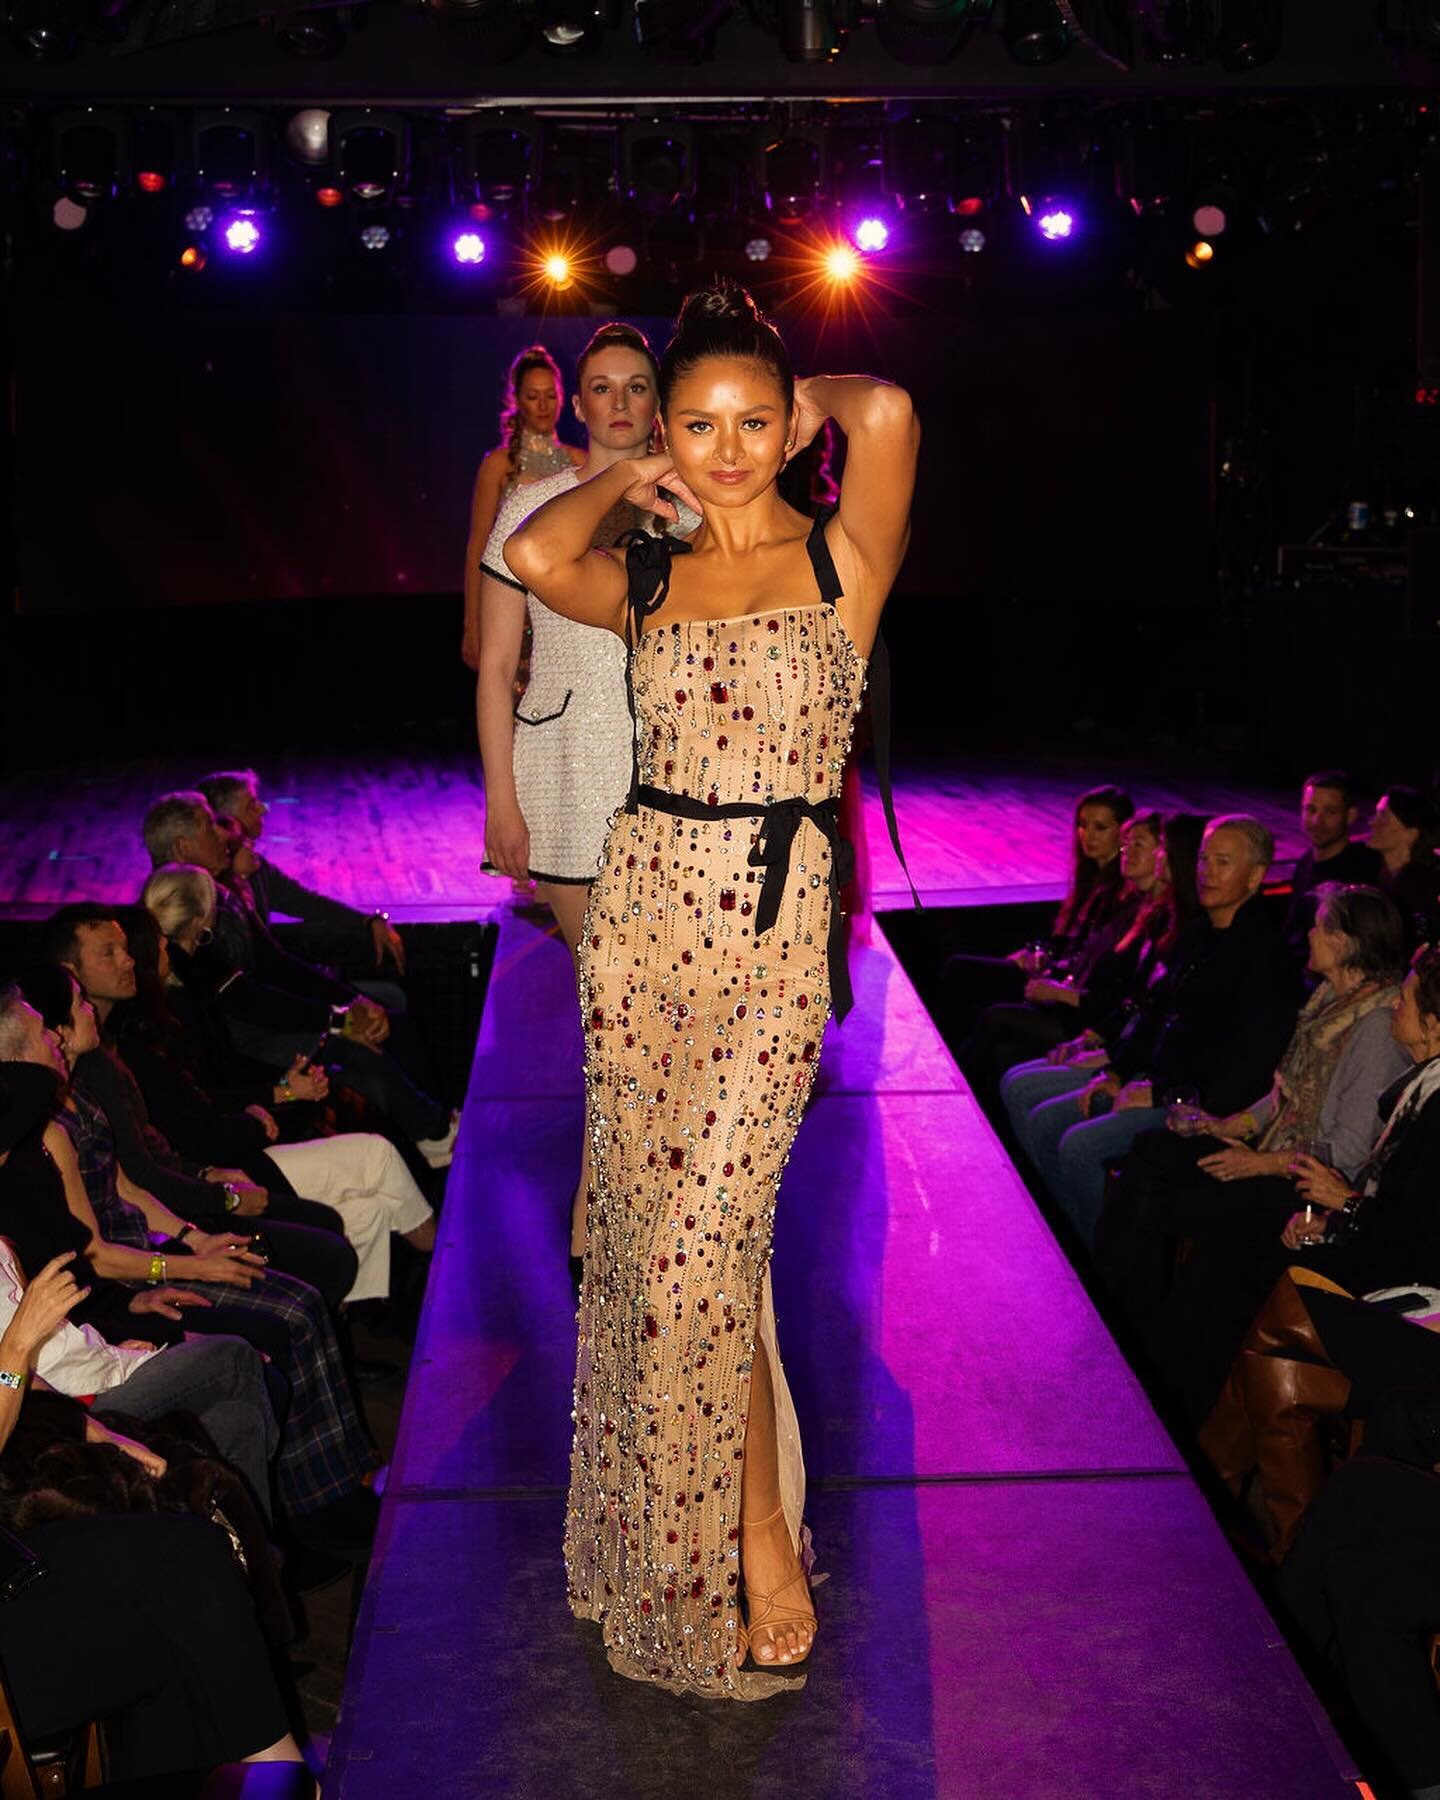 It&rsquo;s been over a week and we are still filled to the brim with gratitude! Thank you for supporting @headq_org and our community at the Aspen Cares Fashion Show!

Check out the gallery of photos from the show. Link in bio.

If you didn&rsquo;t m